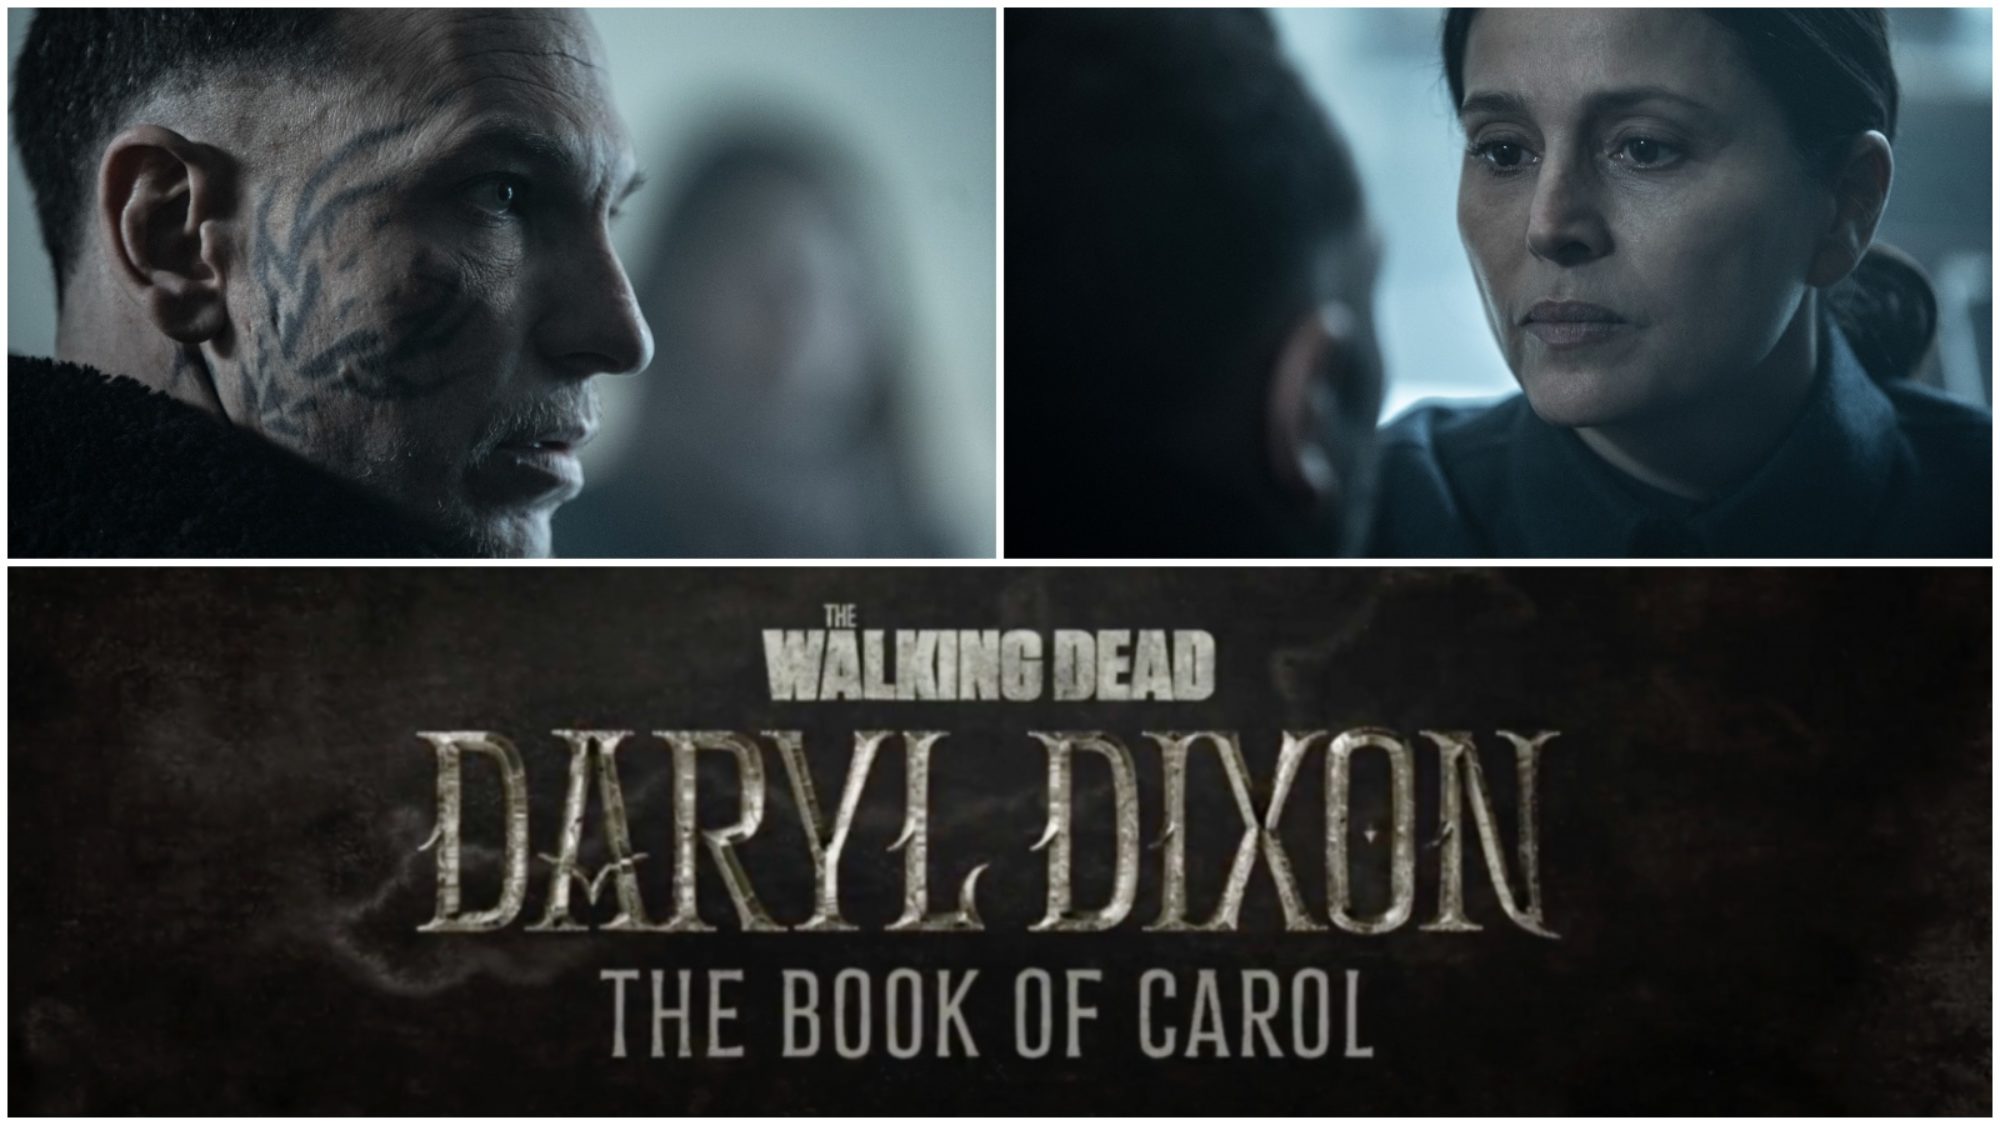 Charrier and Levi remind fans of “Book of Carol”